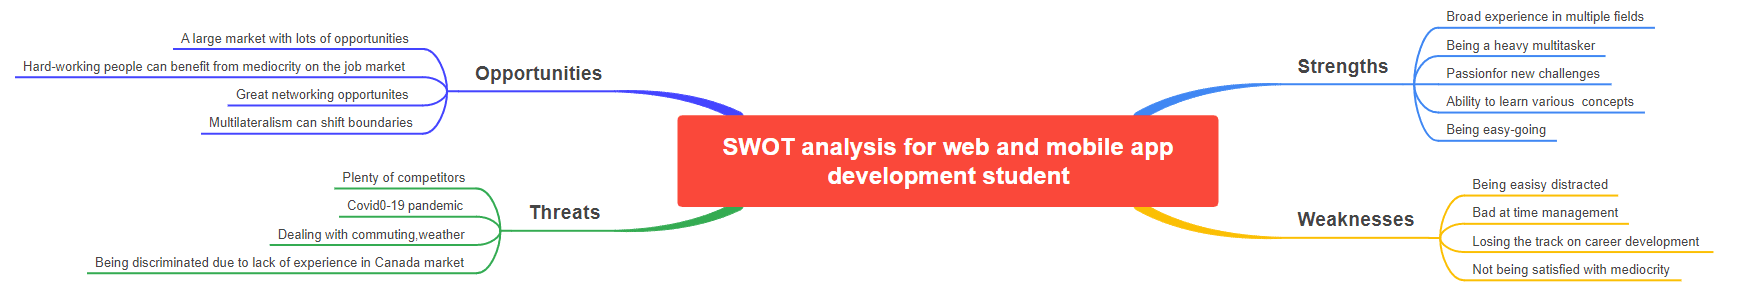 SWOT analysis for web and mobile development student